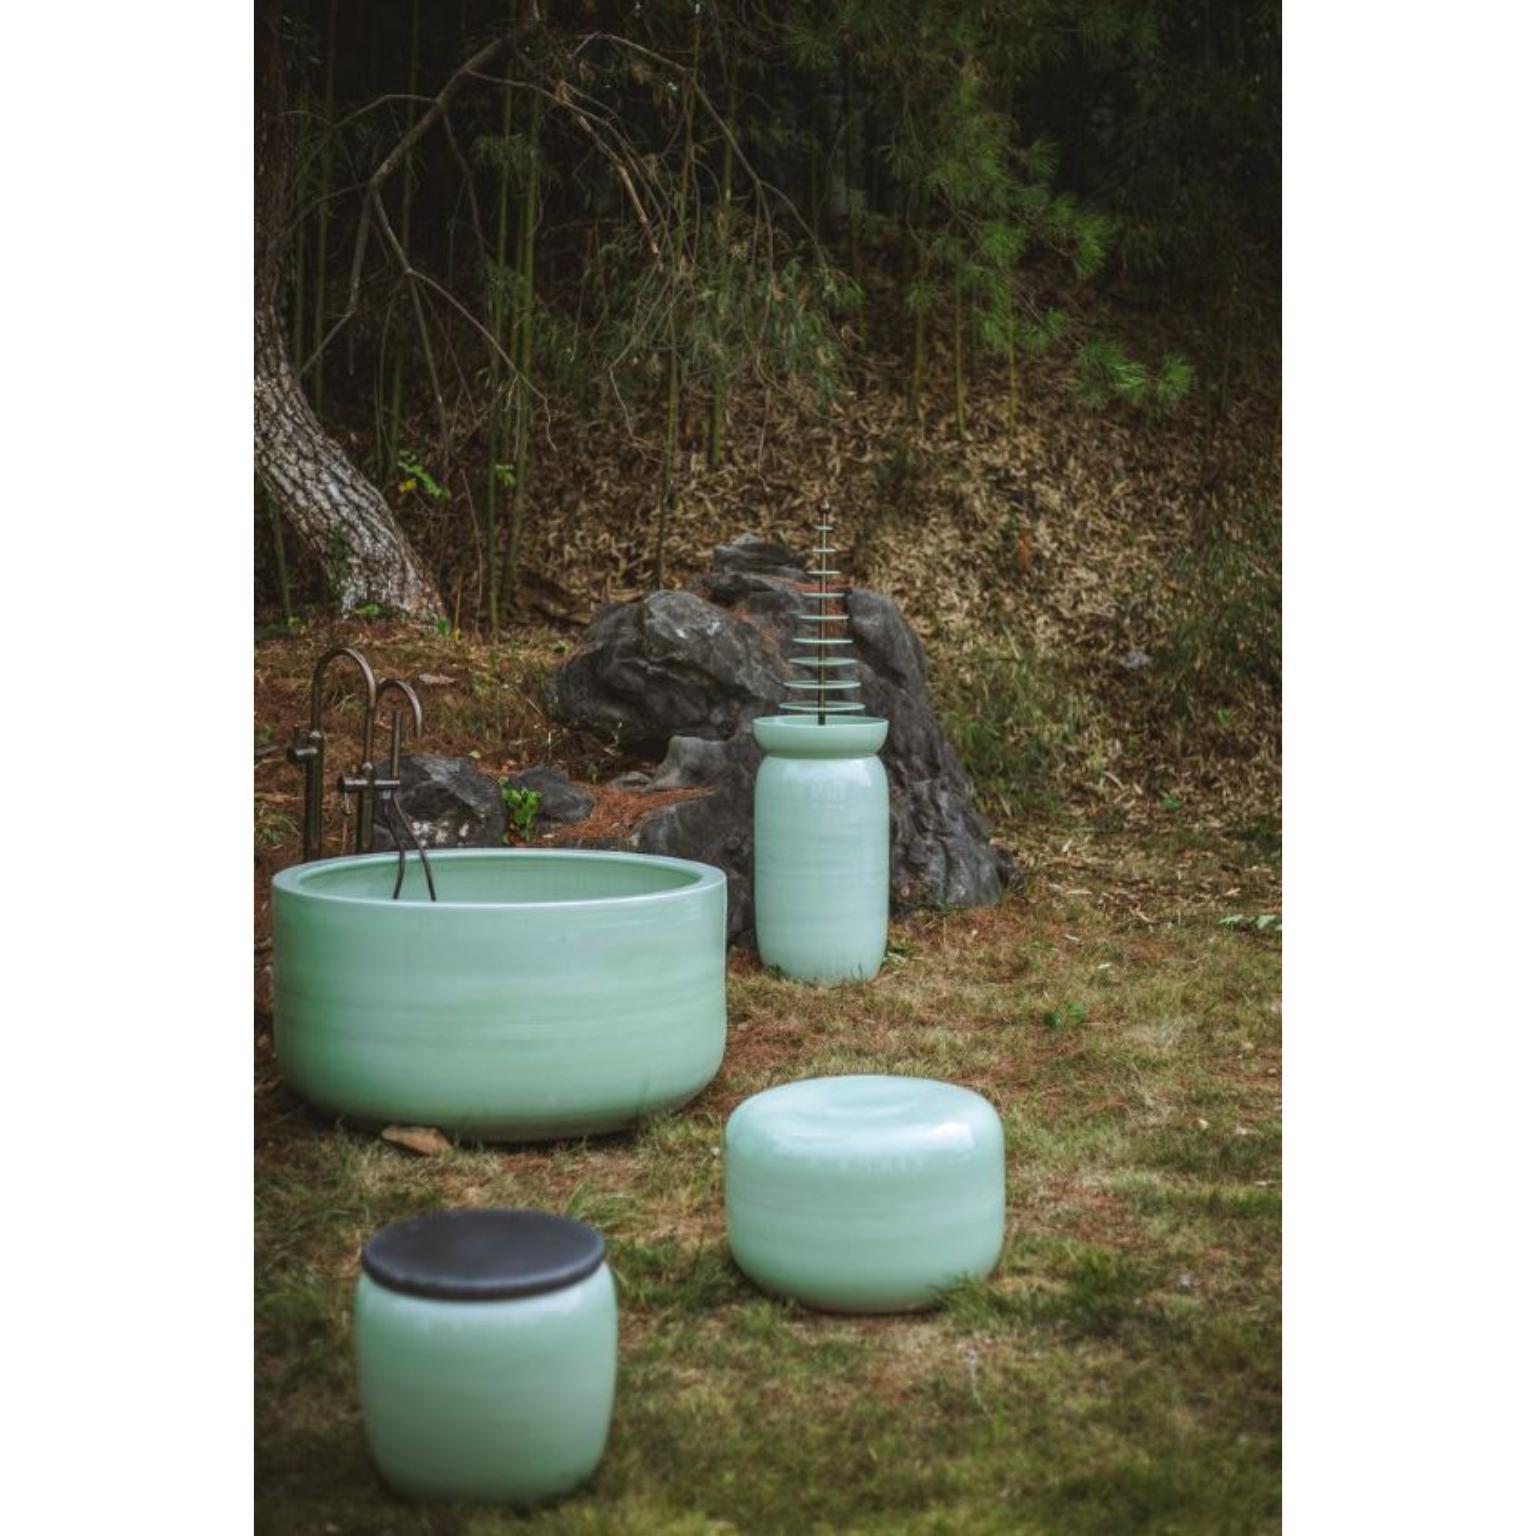 Aqua Botanica Stool by WL Ceramics
Designer: Edward van Vliet
Materials: Porcelain
Dimensions: H40 x Ø40 cm


At WL CERAMICS we make porcelain with passion. We are a family run company based in Jingdezhen, China, the birthplace of porcelain